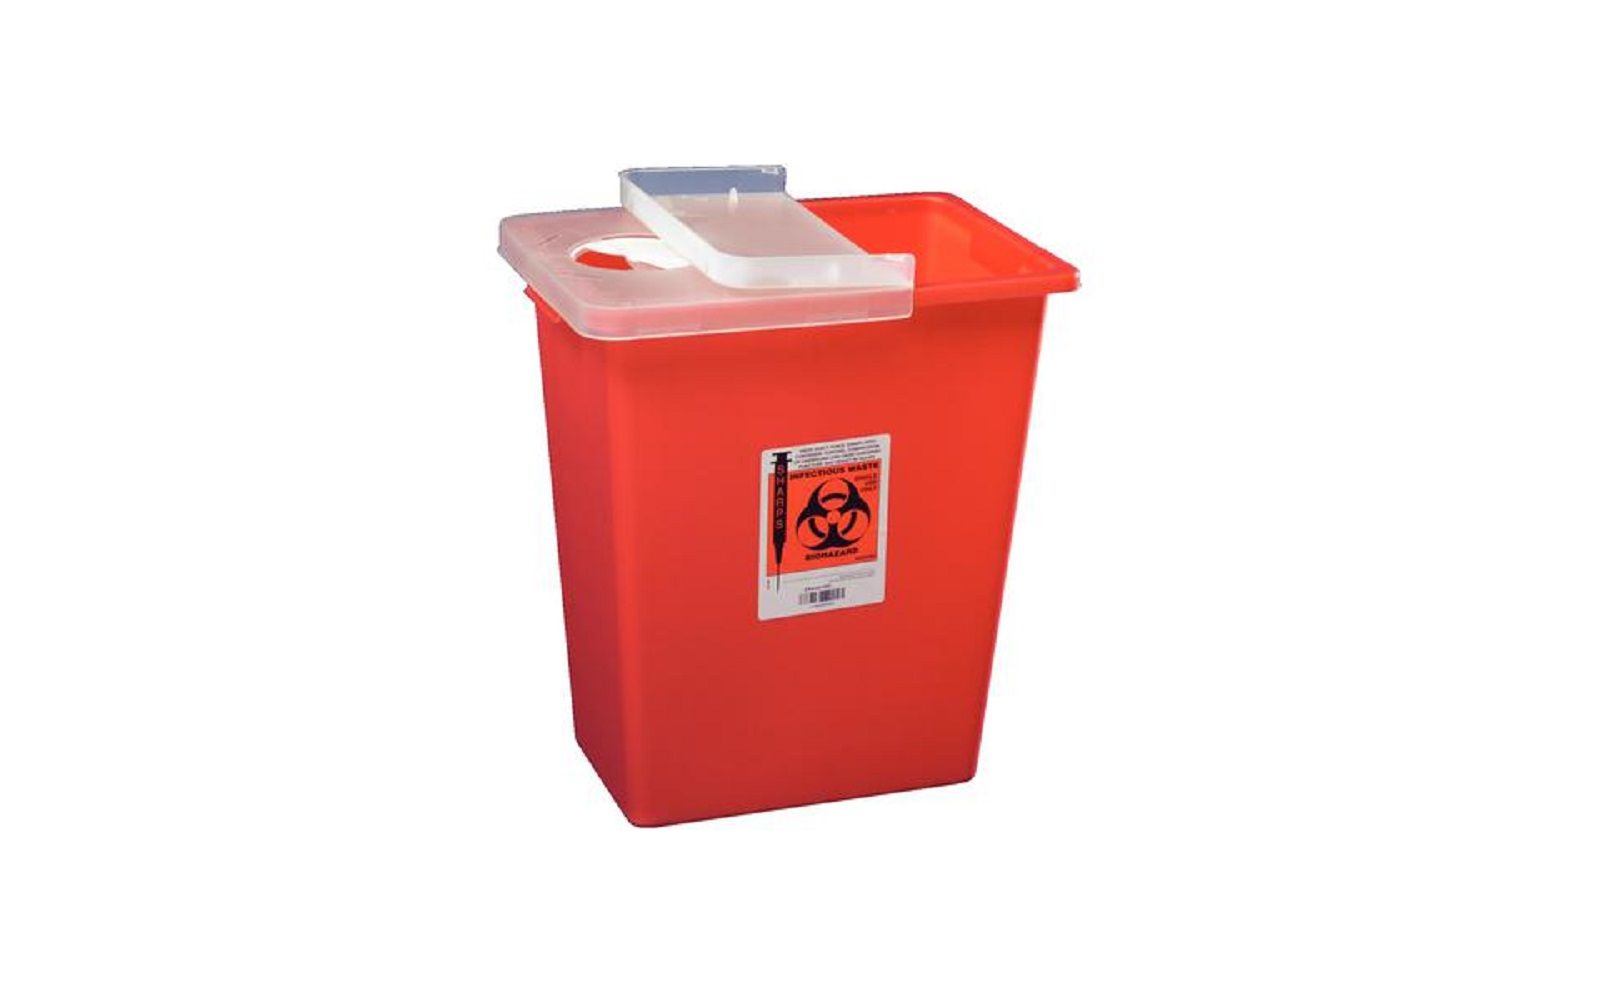 Sharpsafety™ large volume sharps containers – 8 gallon, red, hinged lid